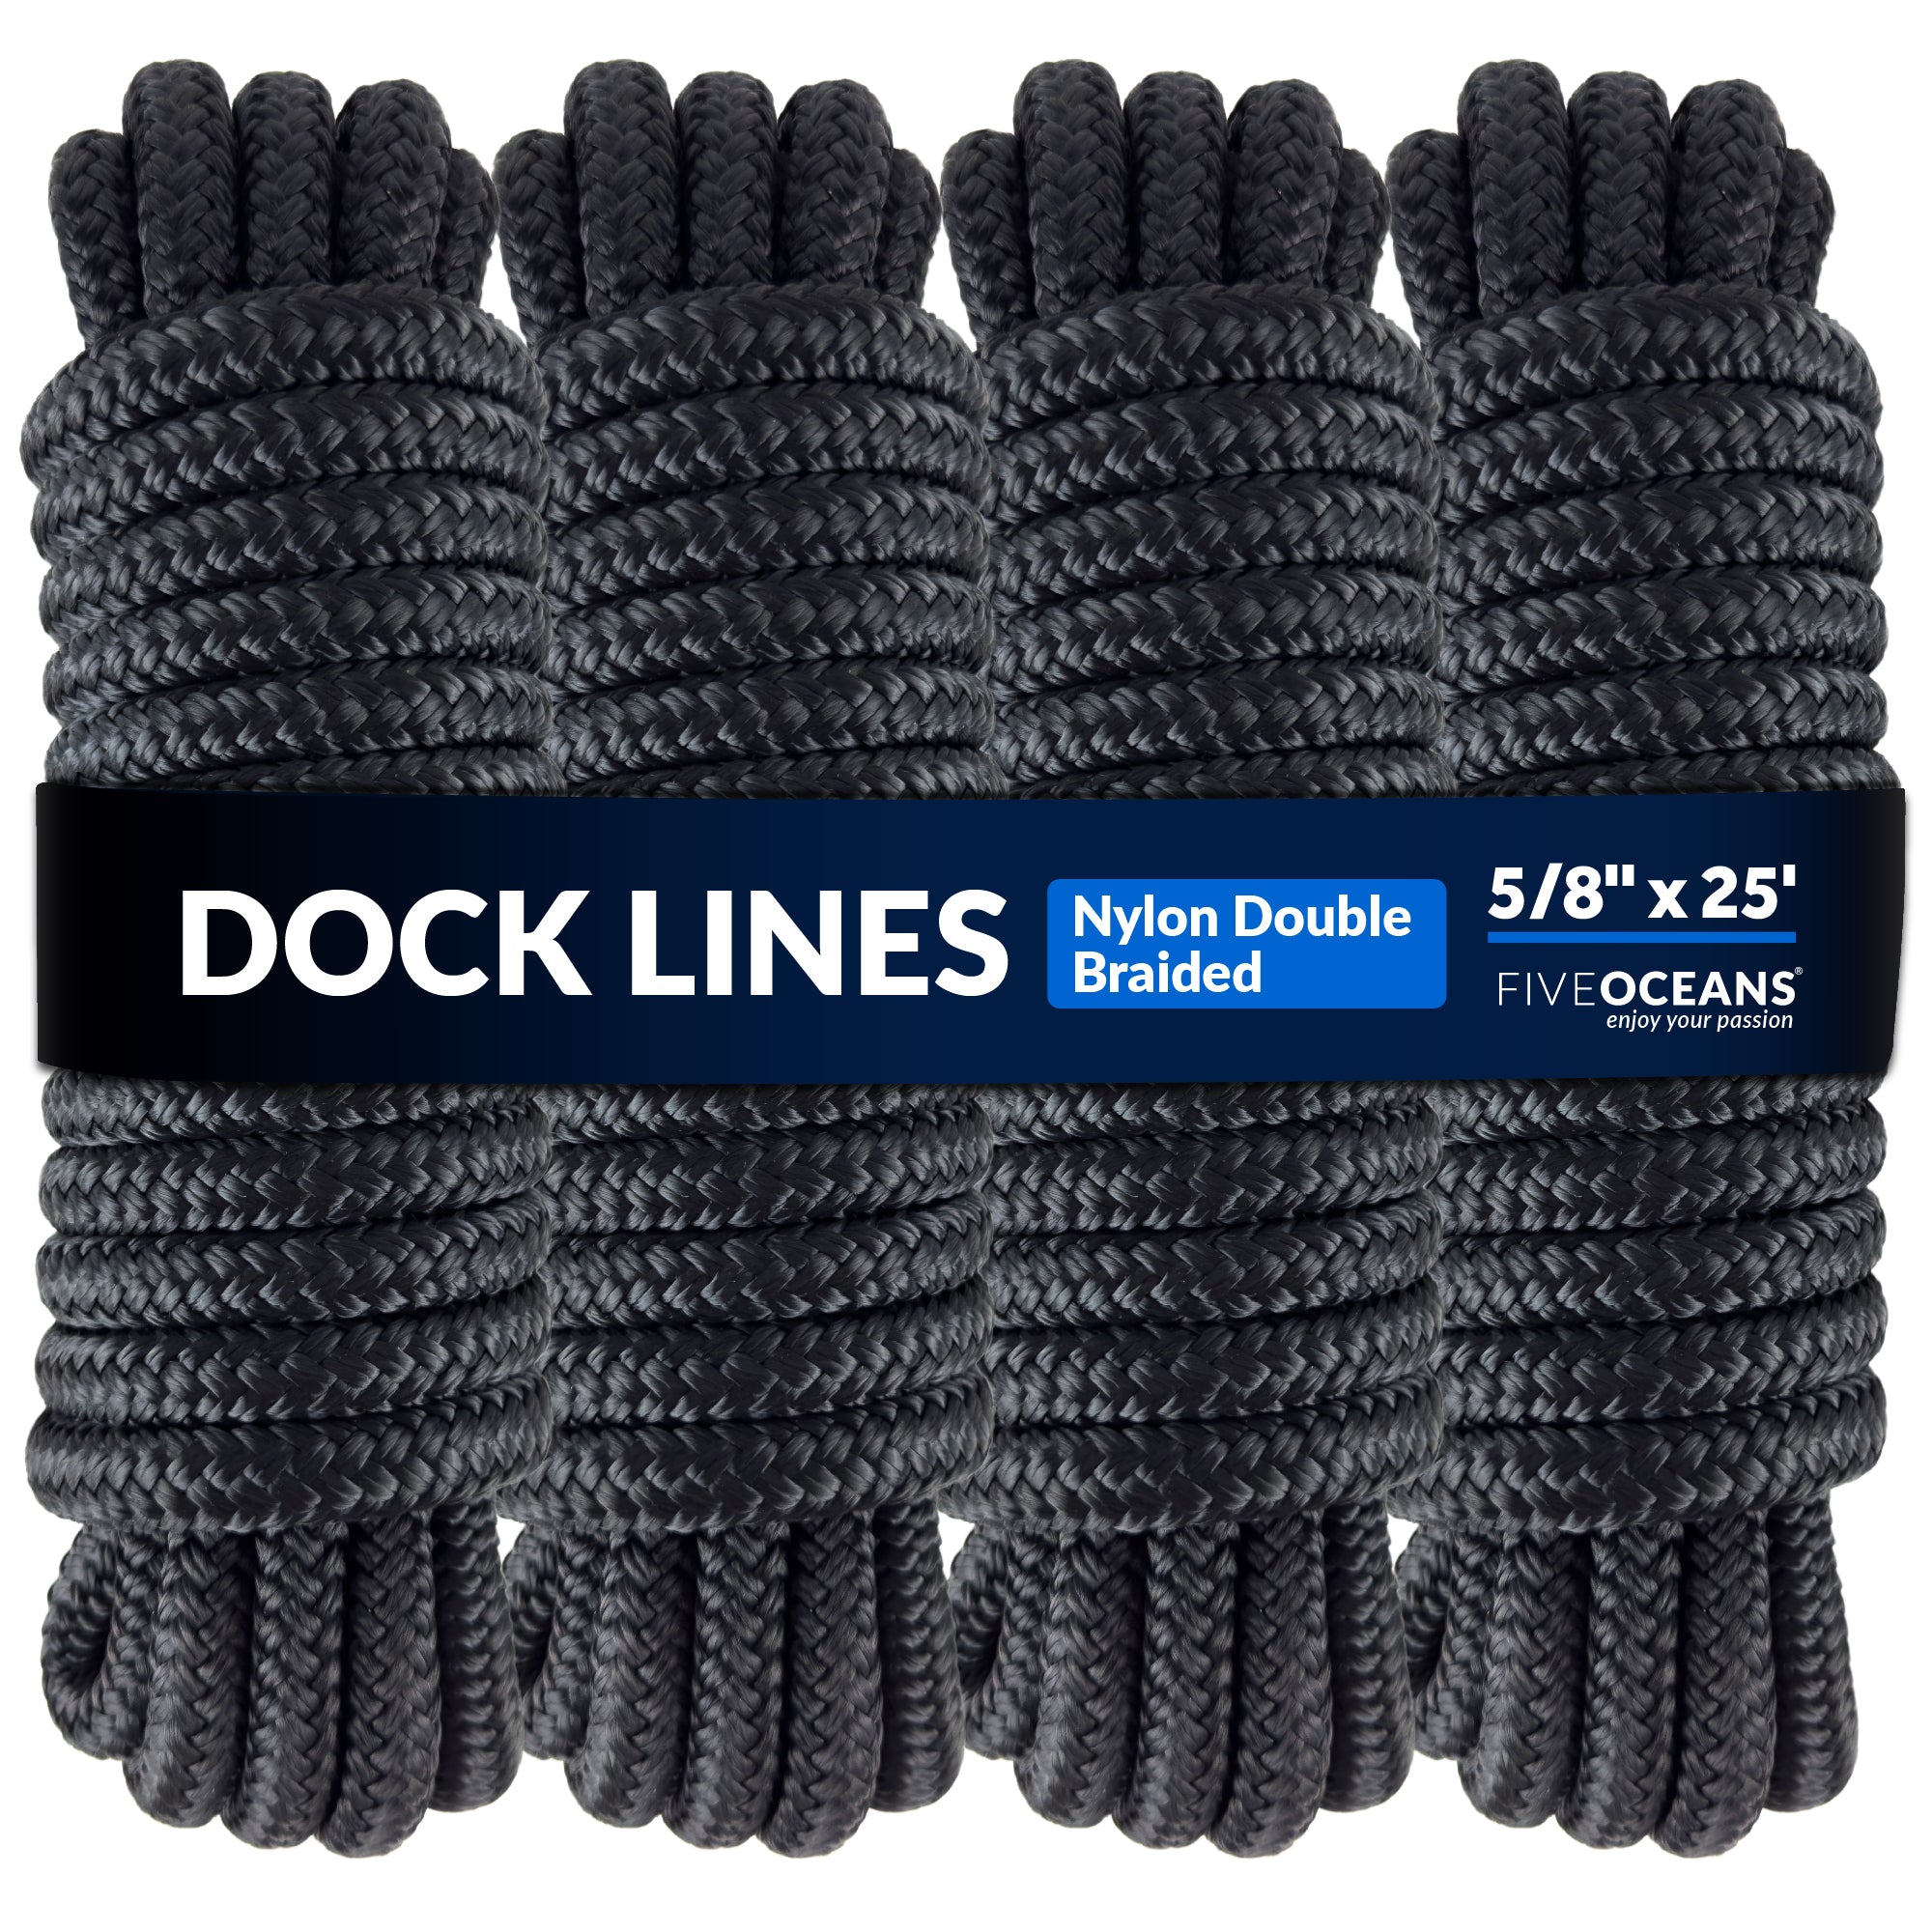 Dock Lines, 5/8"x 25', Black Nylon Double Braided with 16" Eyelet, 4-pack - FO4275-M4